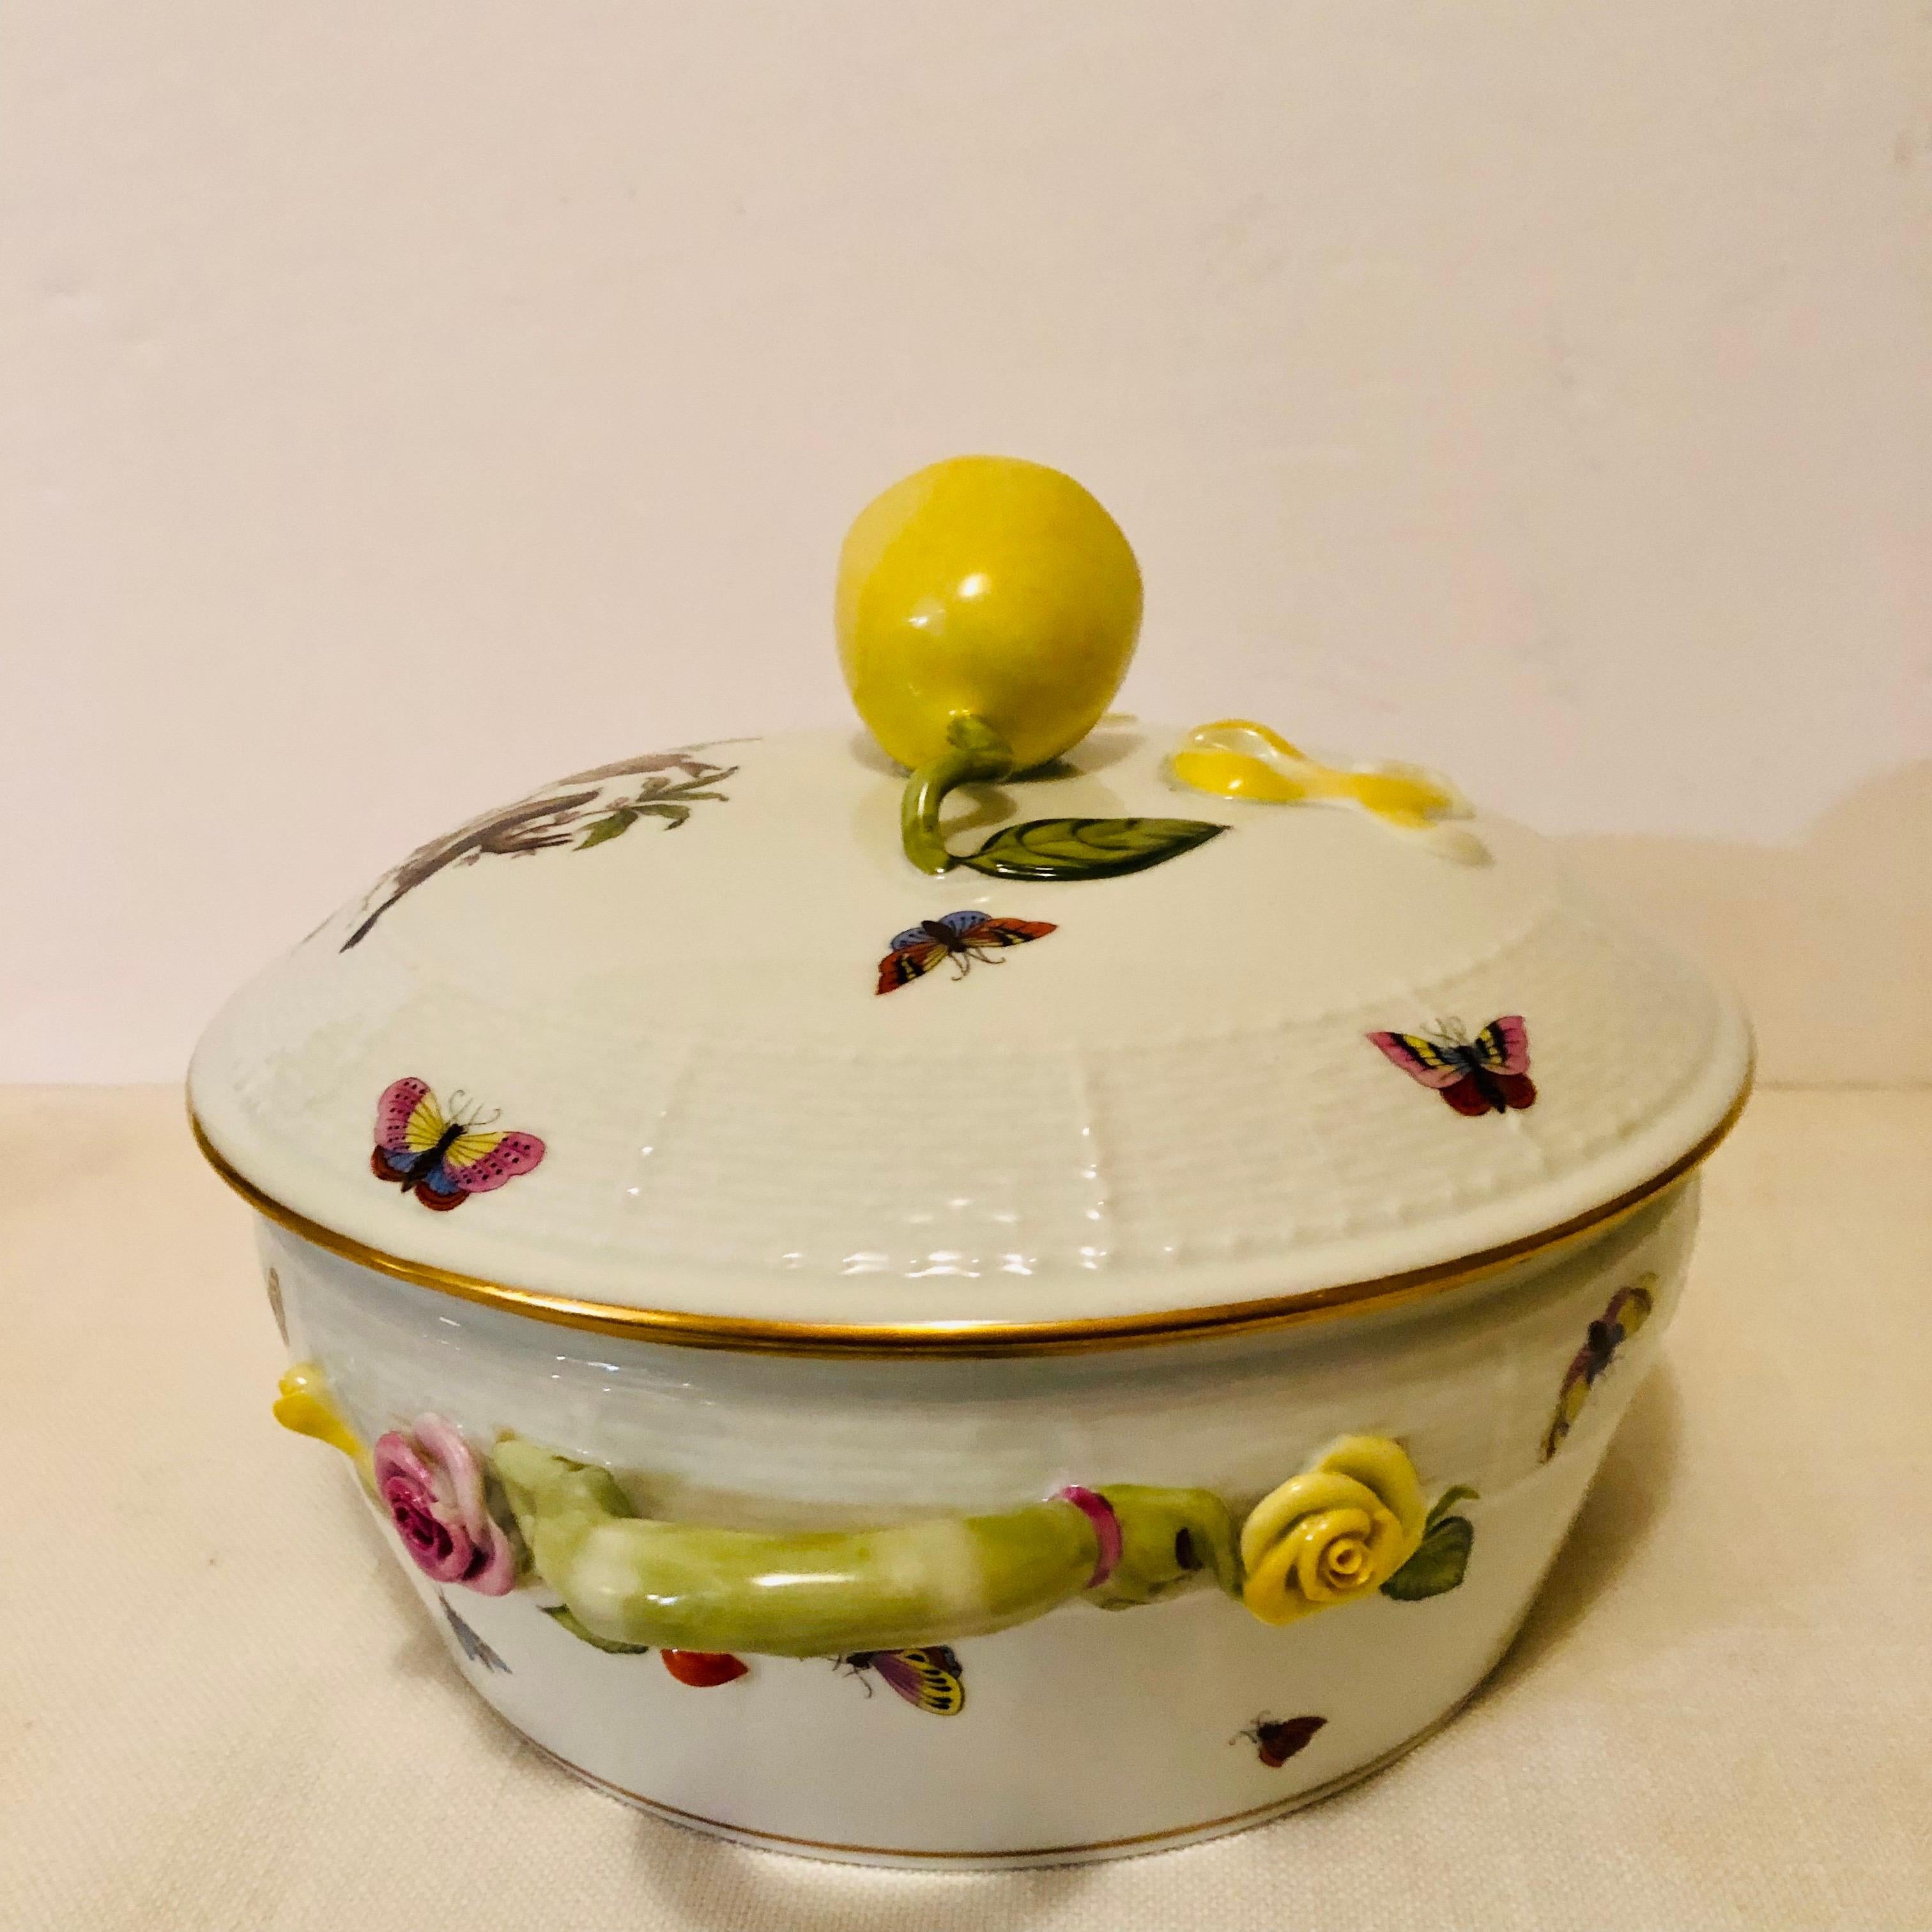 Late 20th Century Hand Painted Herend Rothschild Bird Covered Bowl with a Raised Lemon on the Top